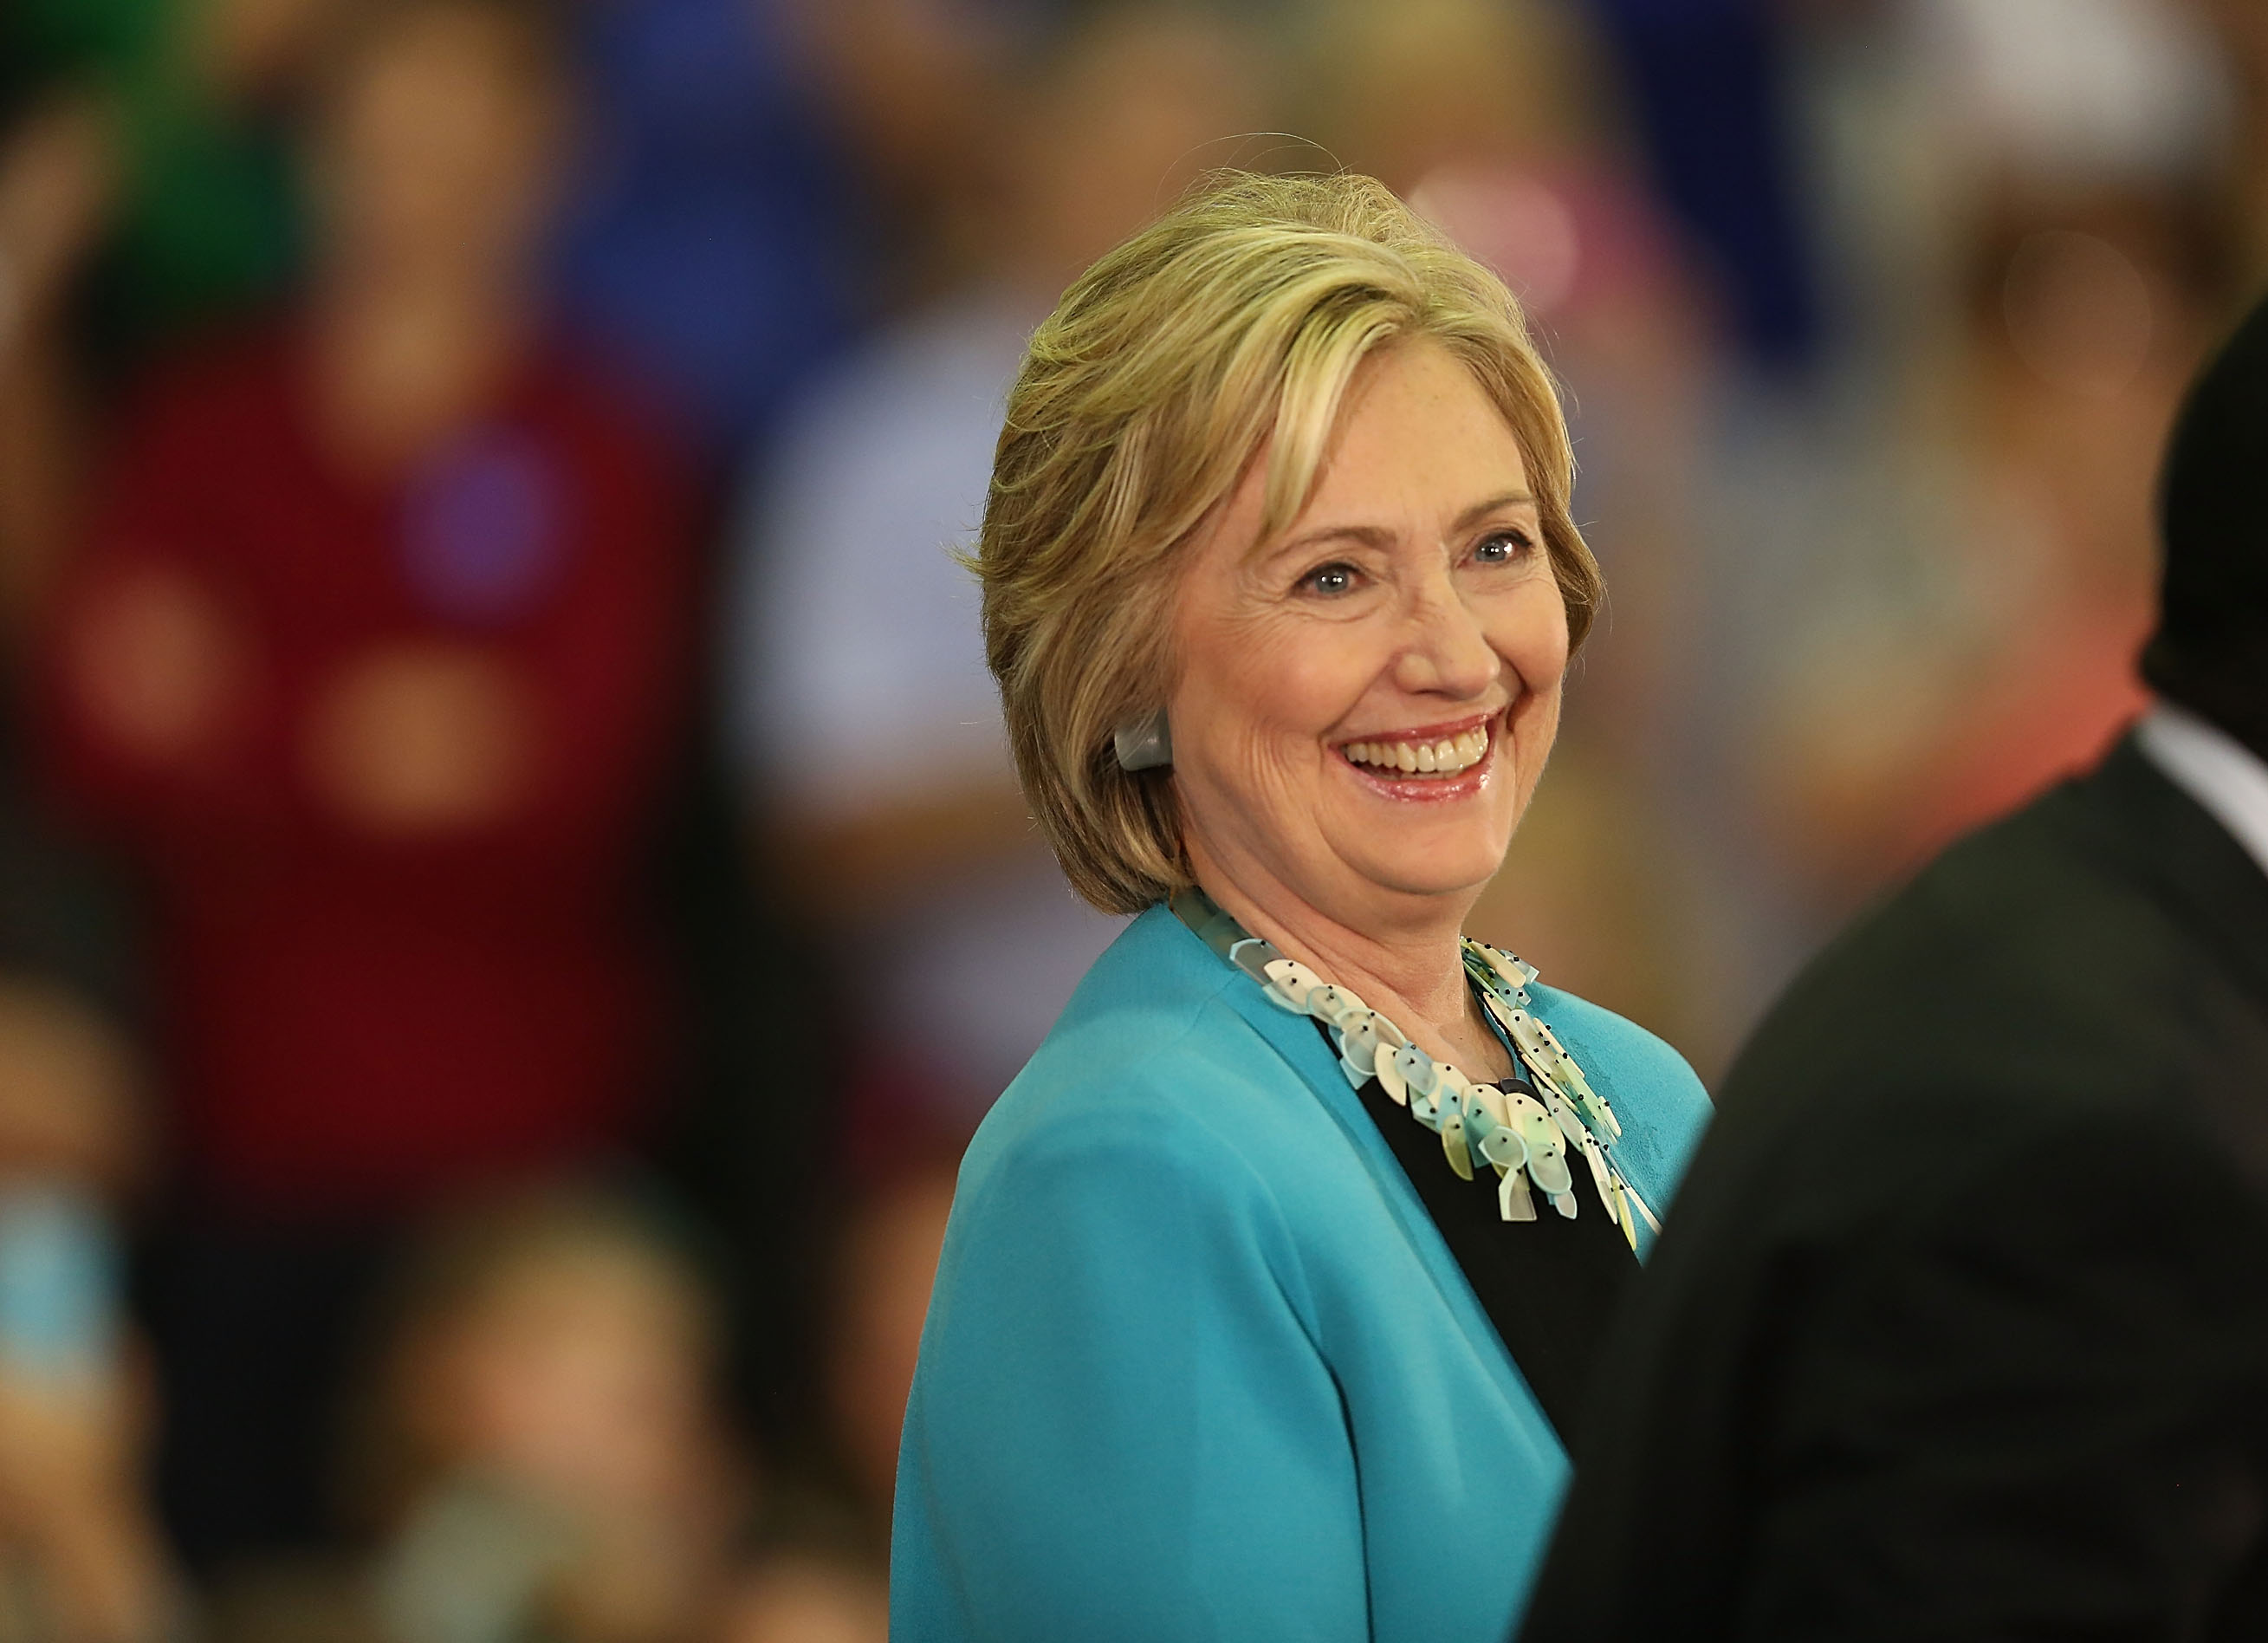 Democratic presidential candidate Hillary Clinton laughs as she is introduced during her campaign stop at the Broward College Ð Hugh Adams Central Campus on October 2, 2015, in Davie, Florida. 